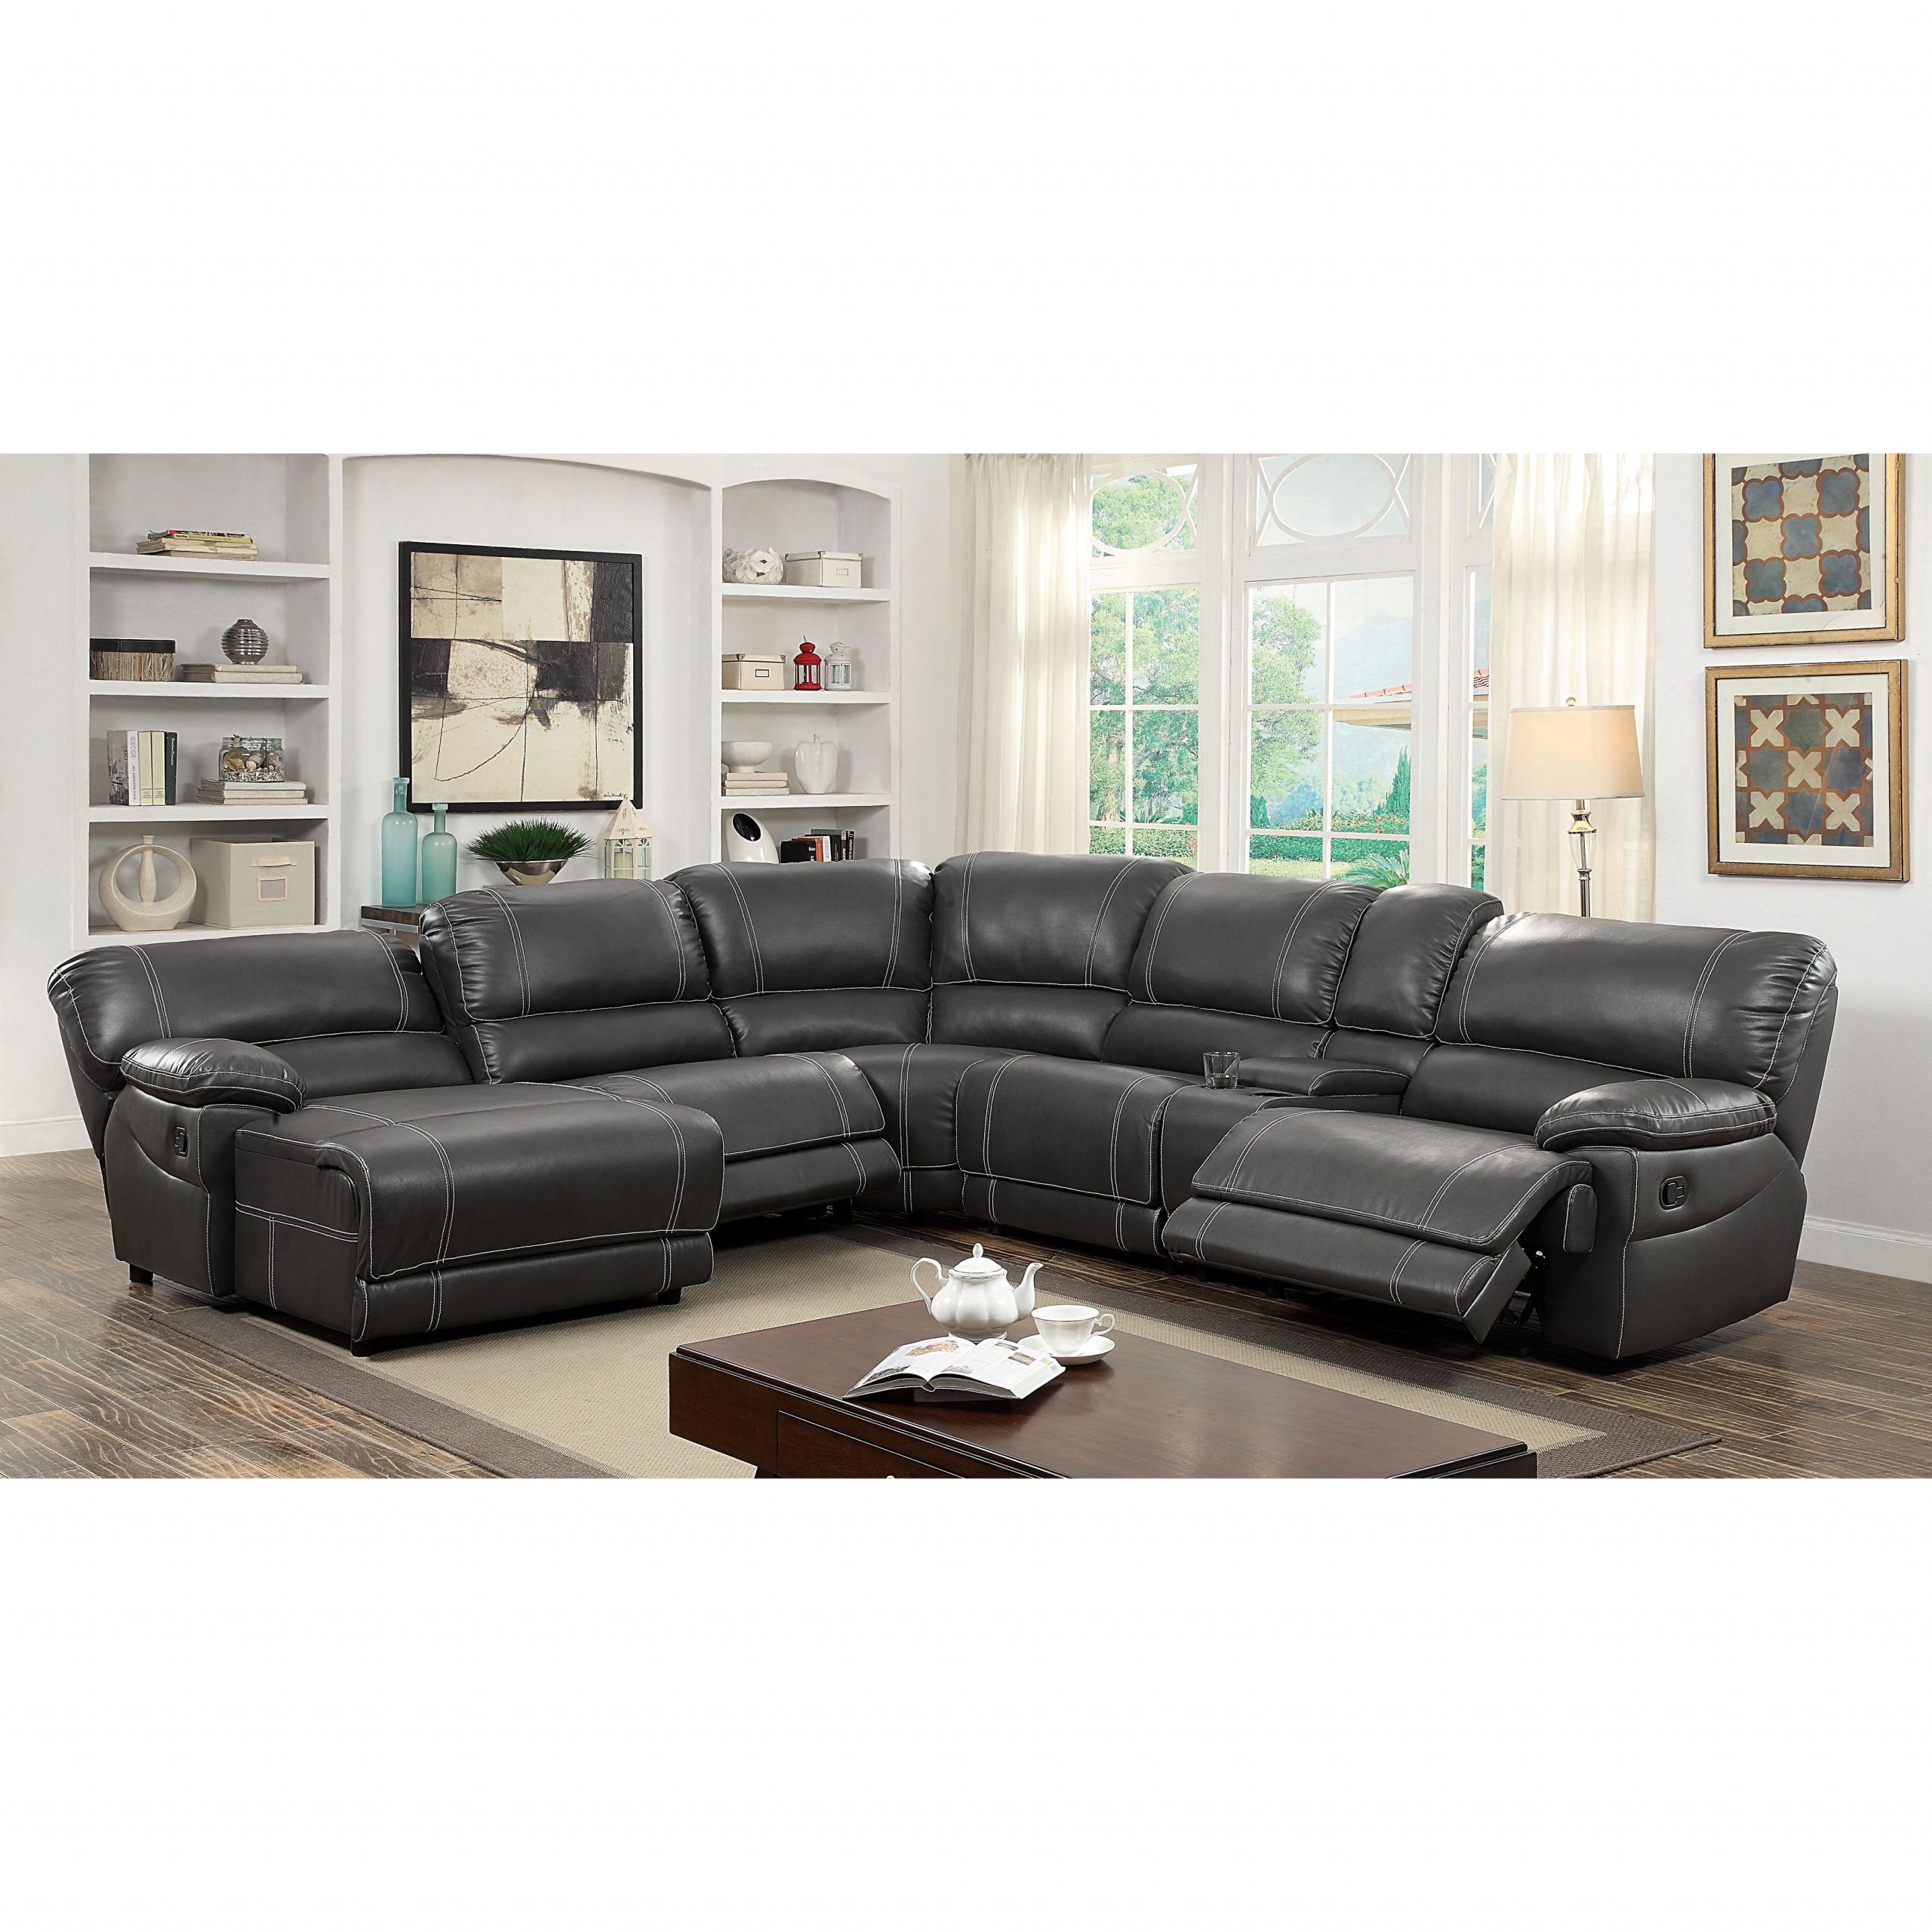 Paulina Top Grain Italian Leather Sectional Sofa – 8089927 Within [%Matilda 100% Top Grain Leather Chaise Sectional Sofas|Matilda 100% Top Grain Leather Chaise Sectional Sofas%] (View 11 of 15)